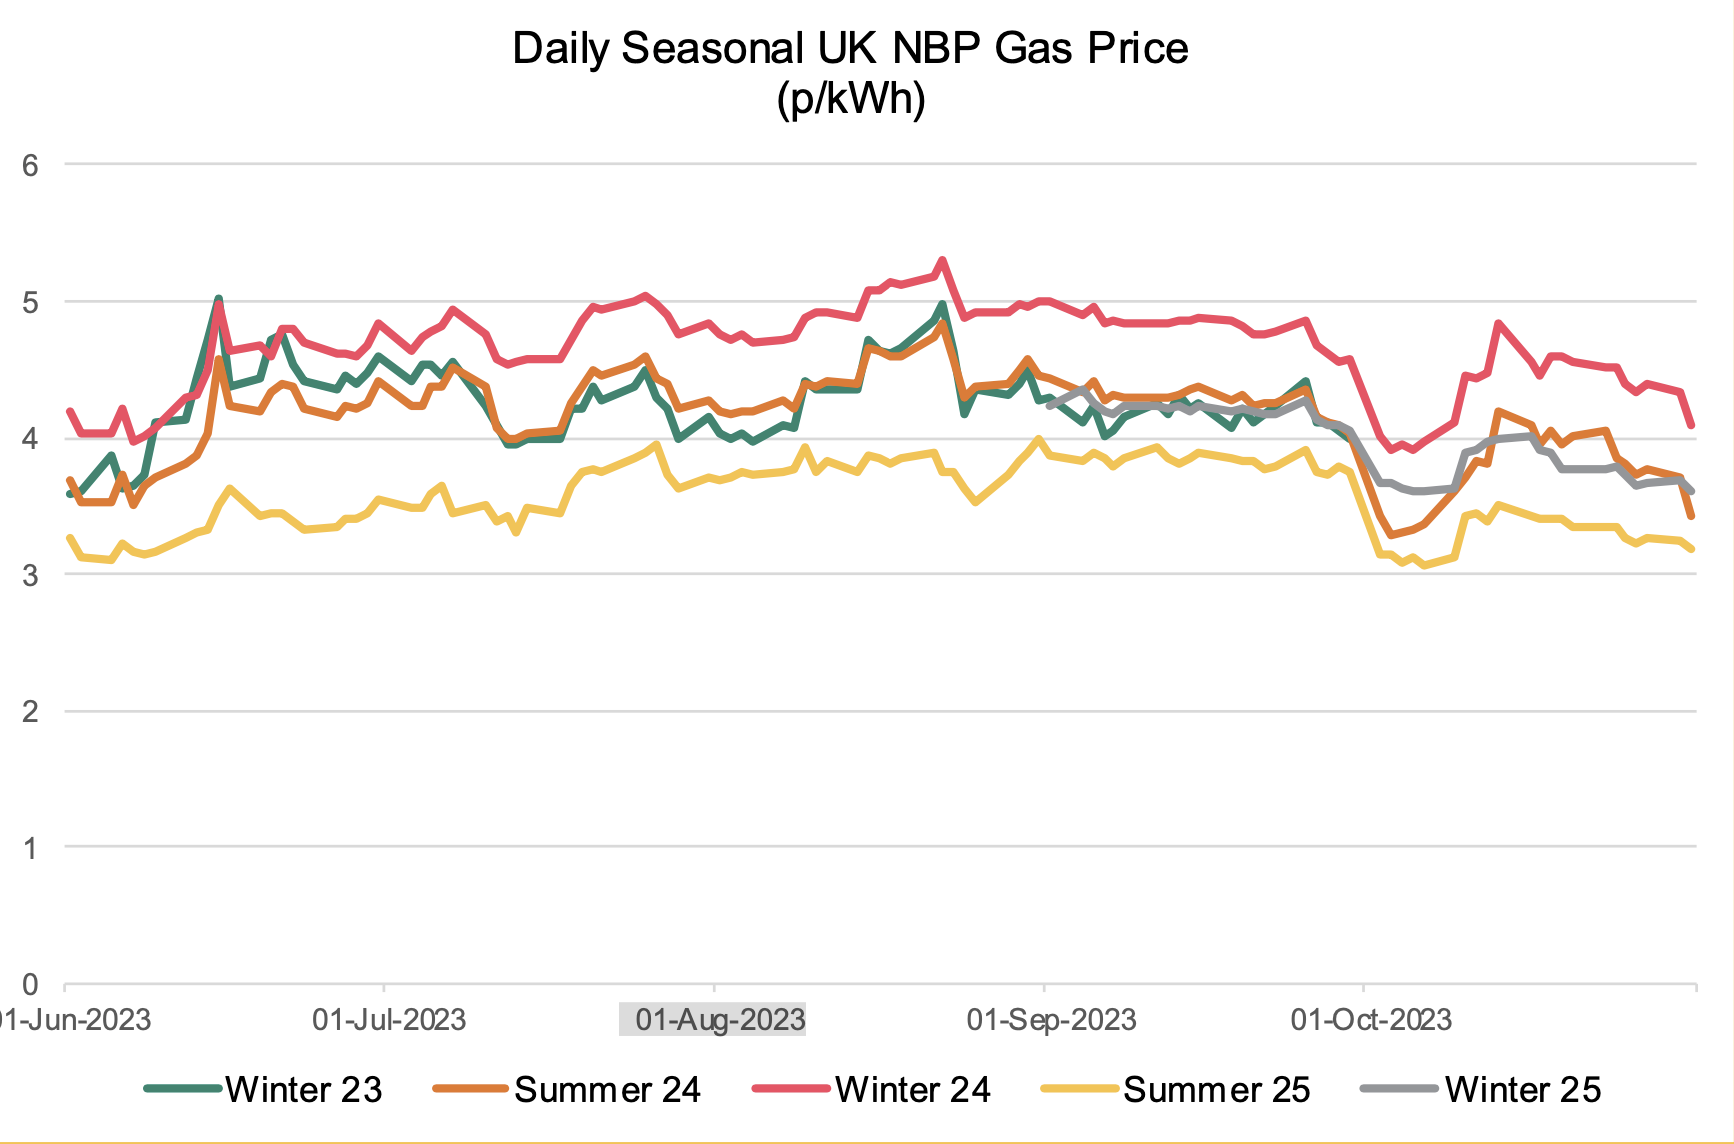 Daily seasonal UK gas prices from summer 2023 to winter 2025